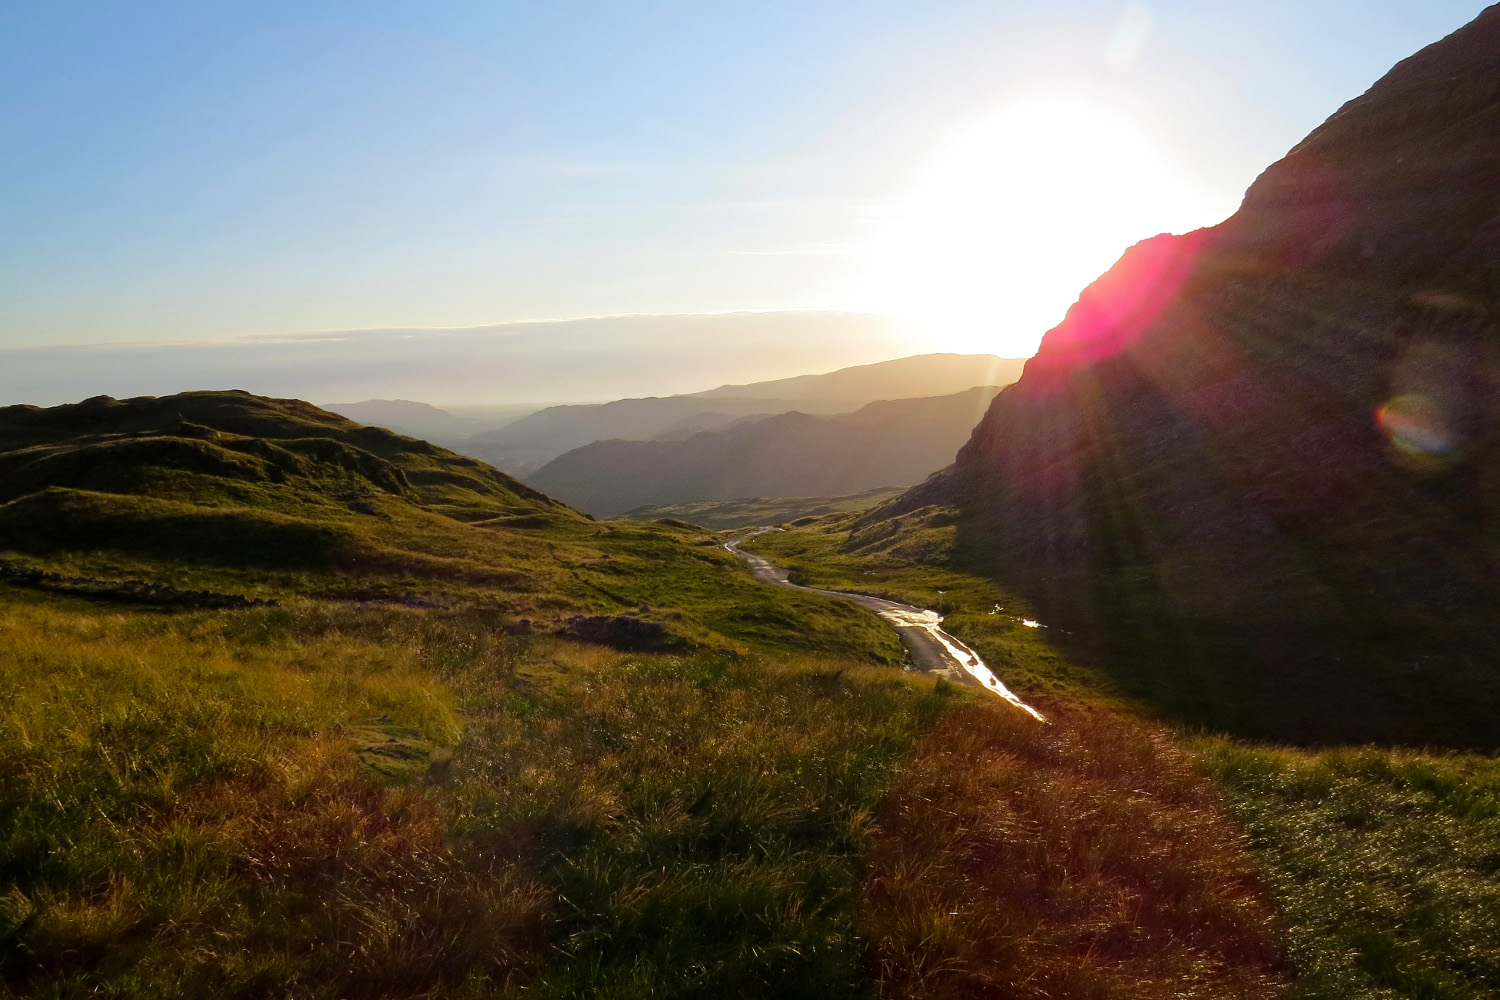 Hardknott Pass. Image by Will Jones / Lonely Planet